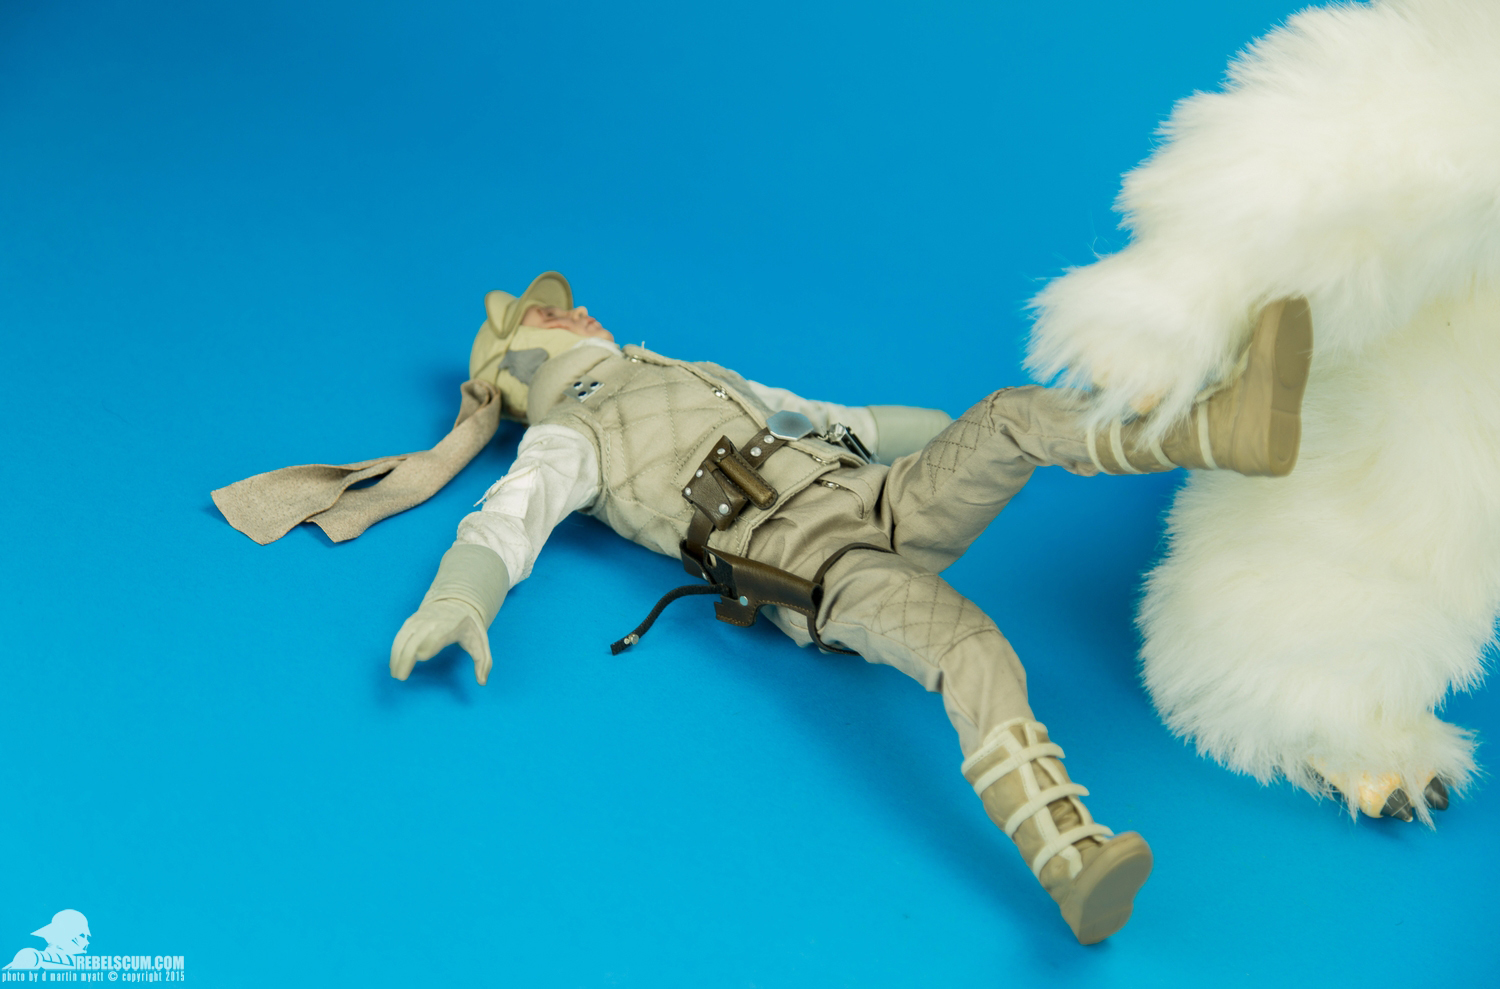 Luke-Skywalker-Hoth-Sixth-Scale-Sideshow-Collectibles-Star-Wars-036.jpg